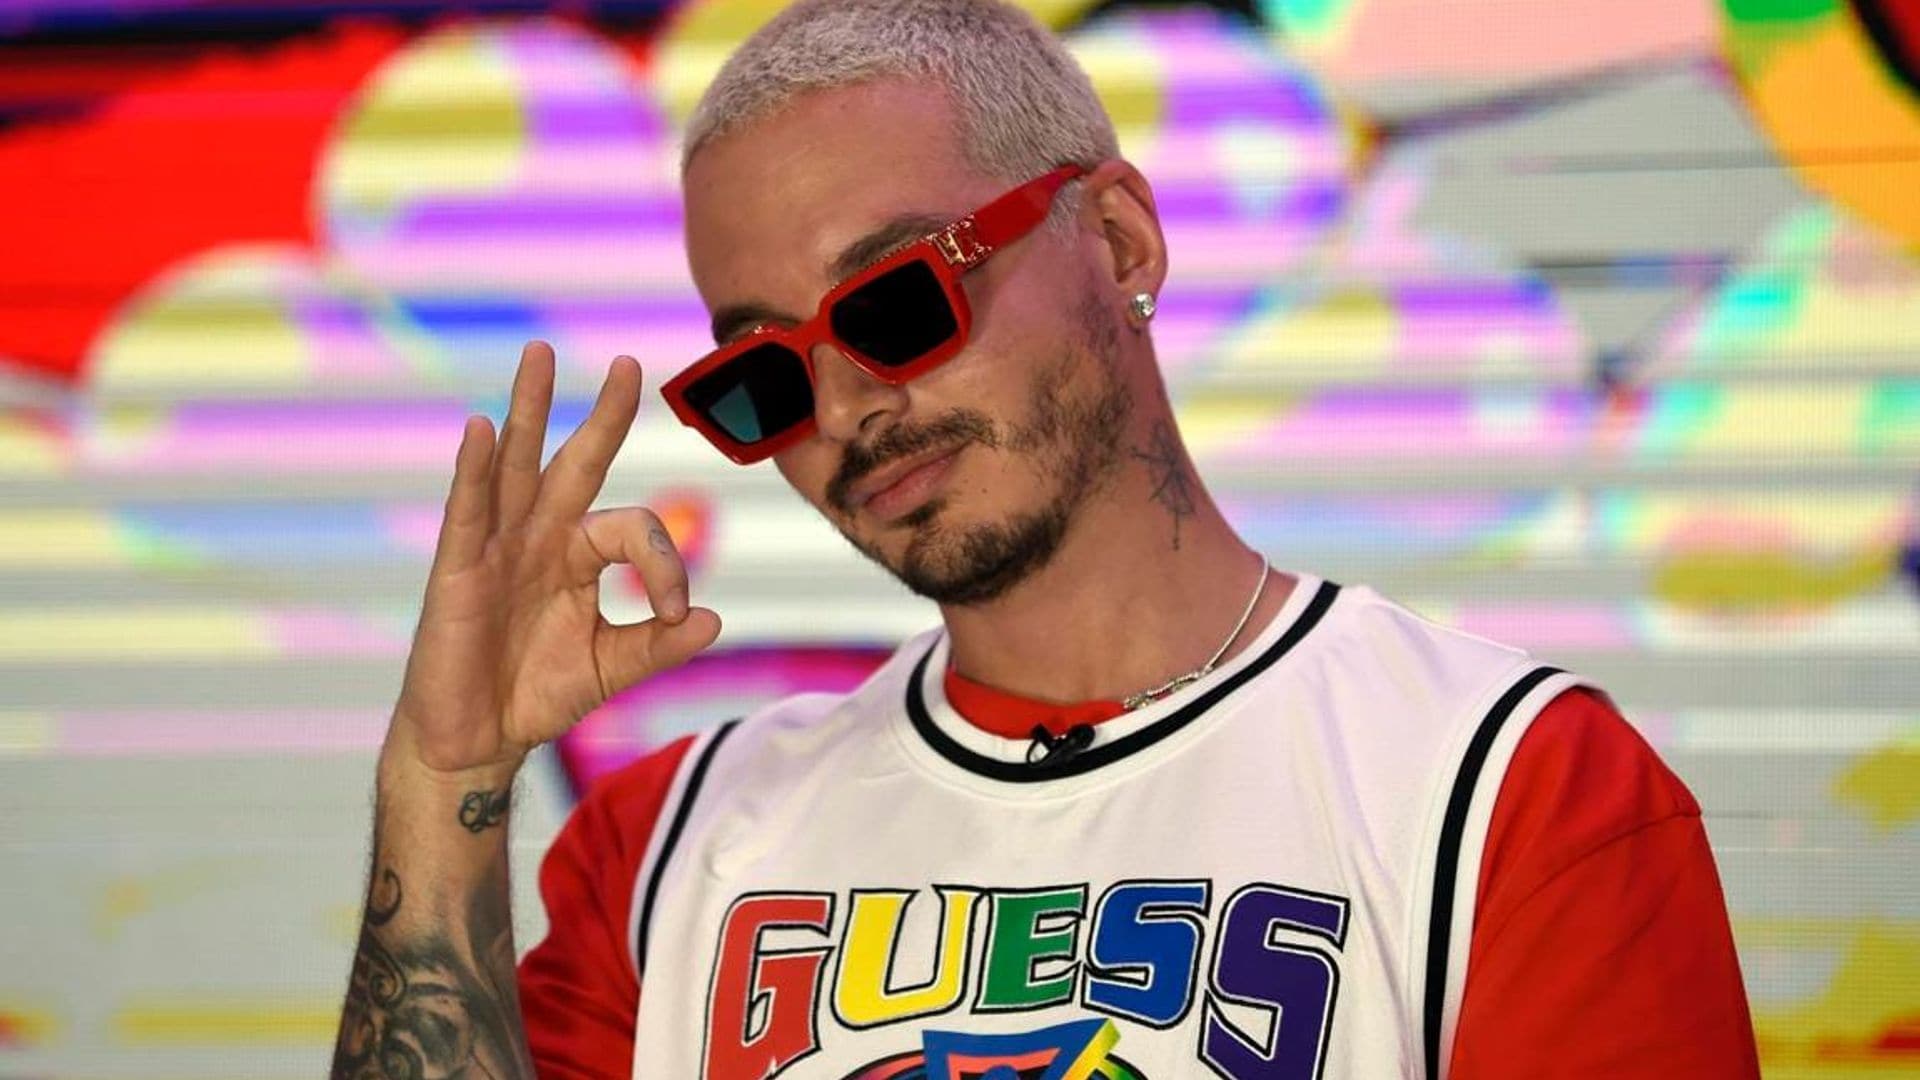 J Balvin, Cristiano Ronaldo and more guys who have changed their look drastically during quarantine